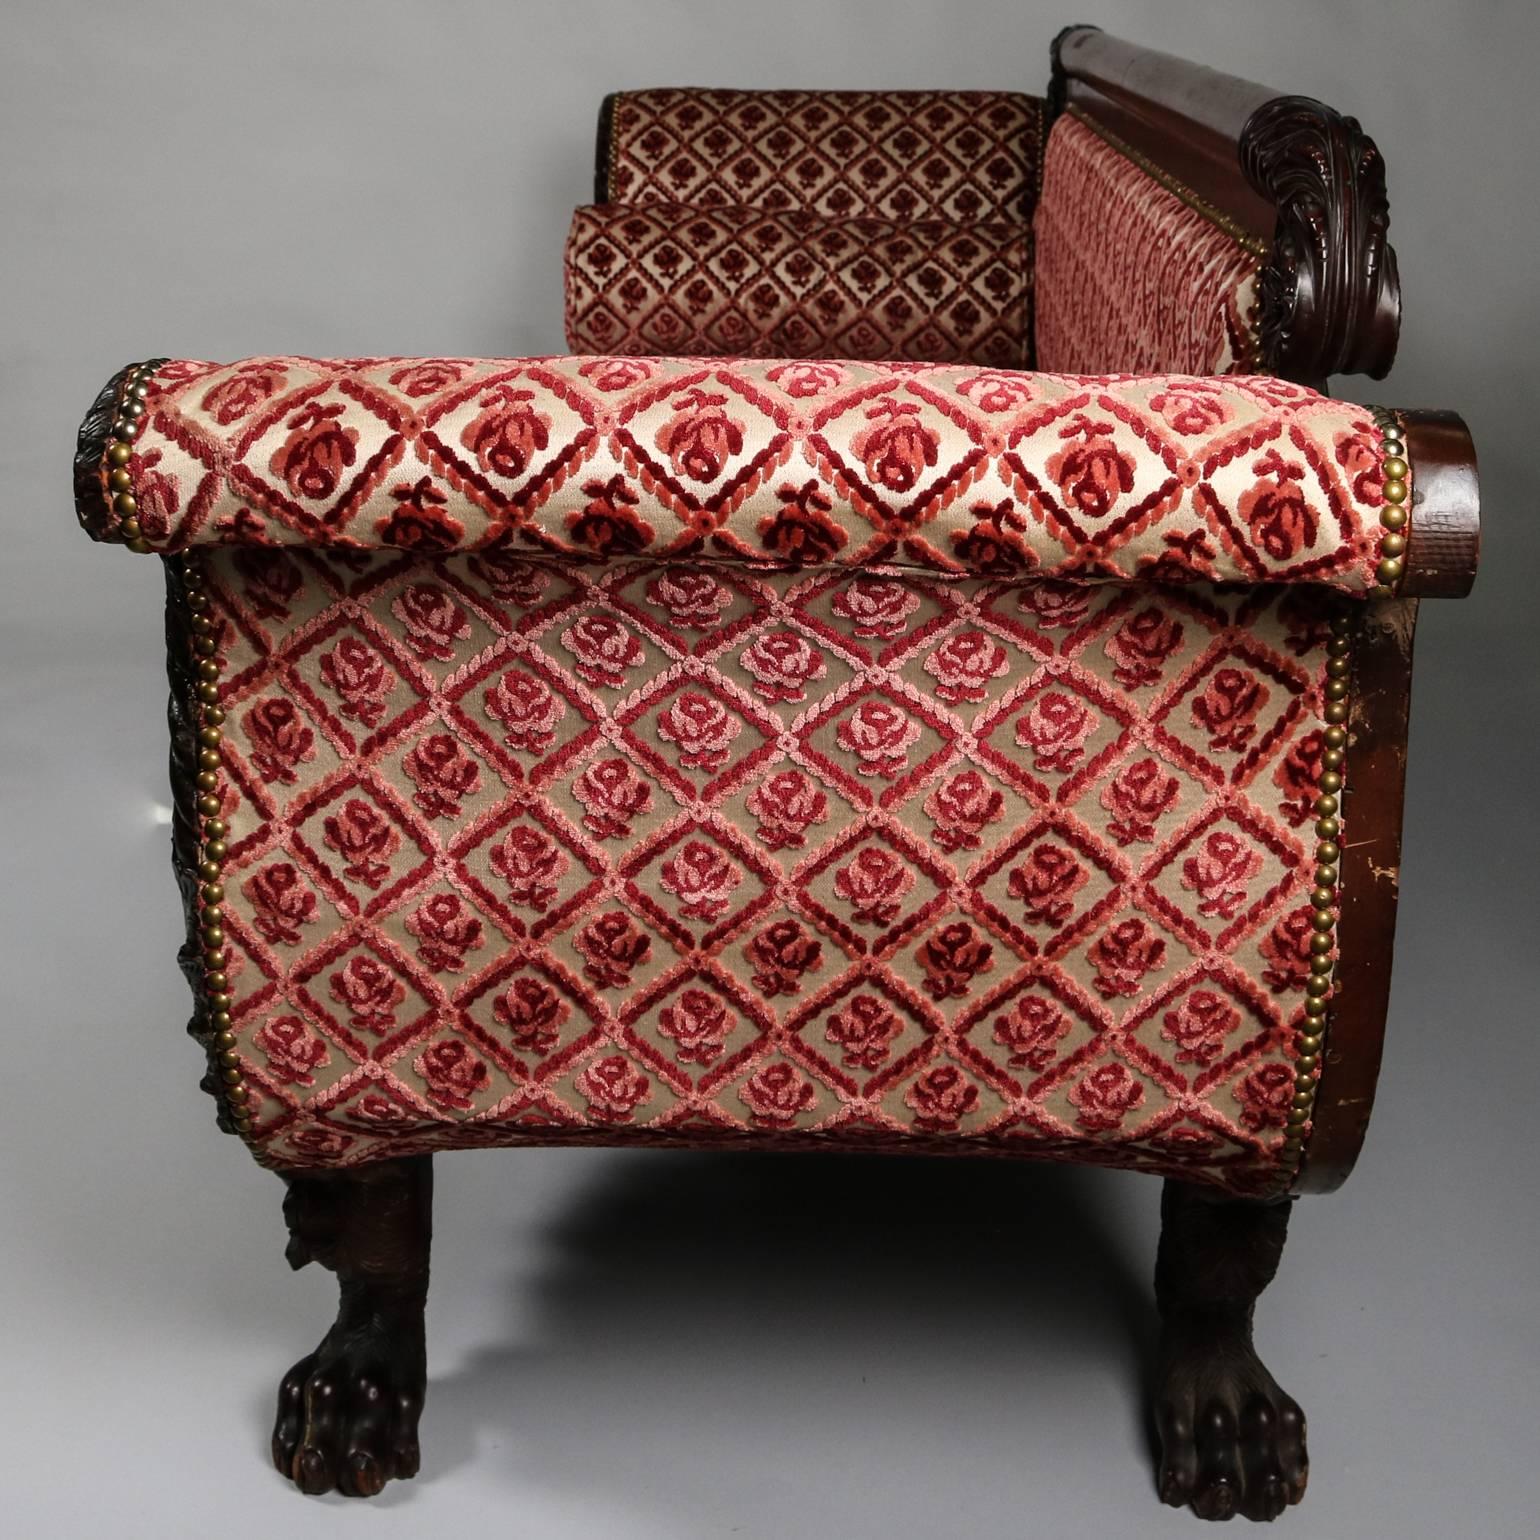 Hand-Carved Antique American Empire Classical Carved Flame Mahogany Scroll Arm Sofa